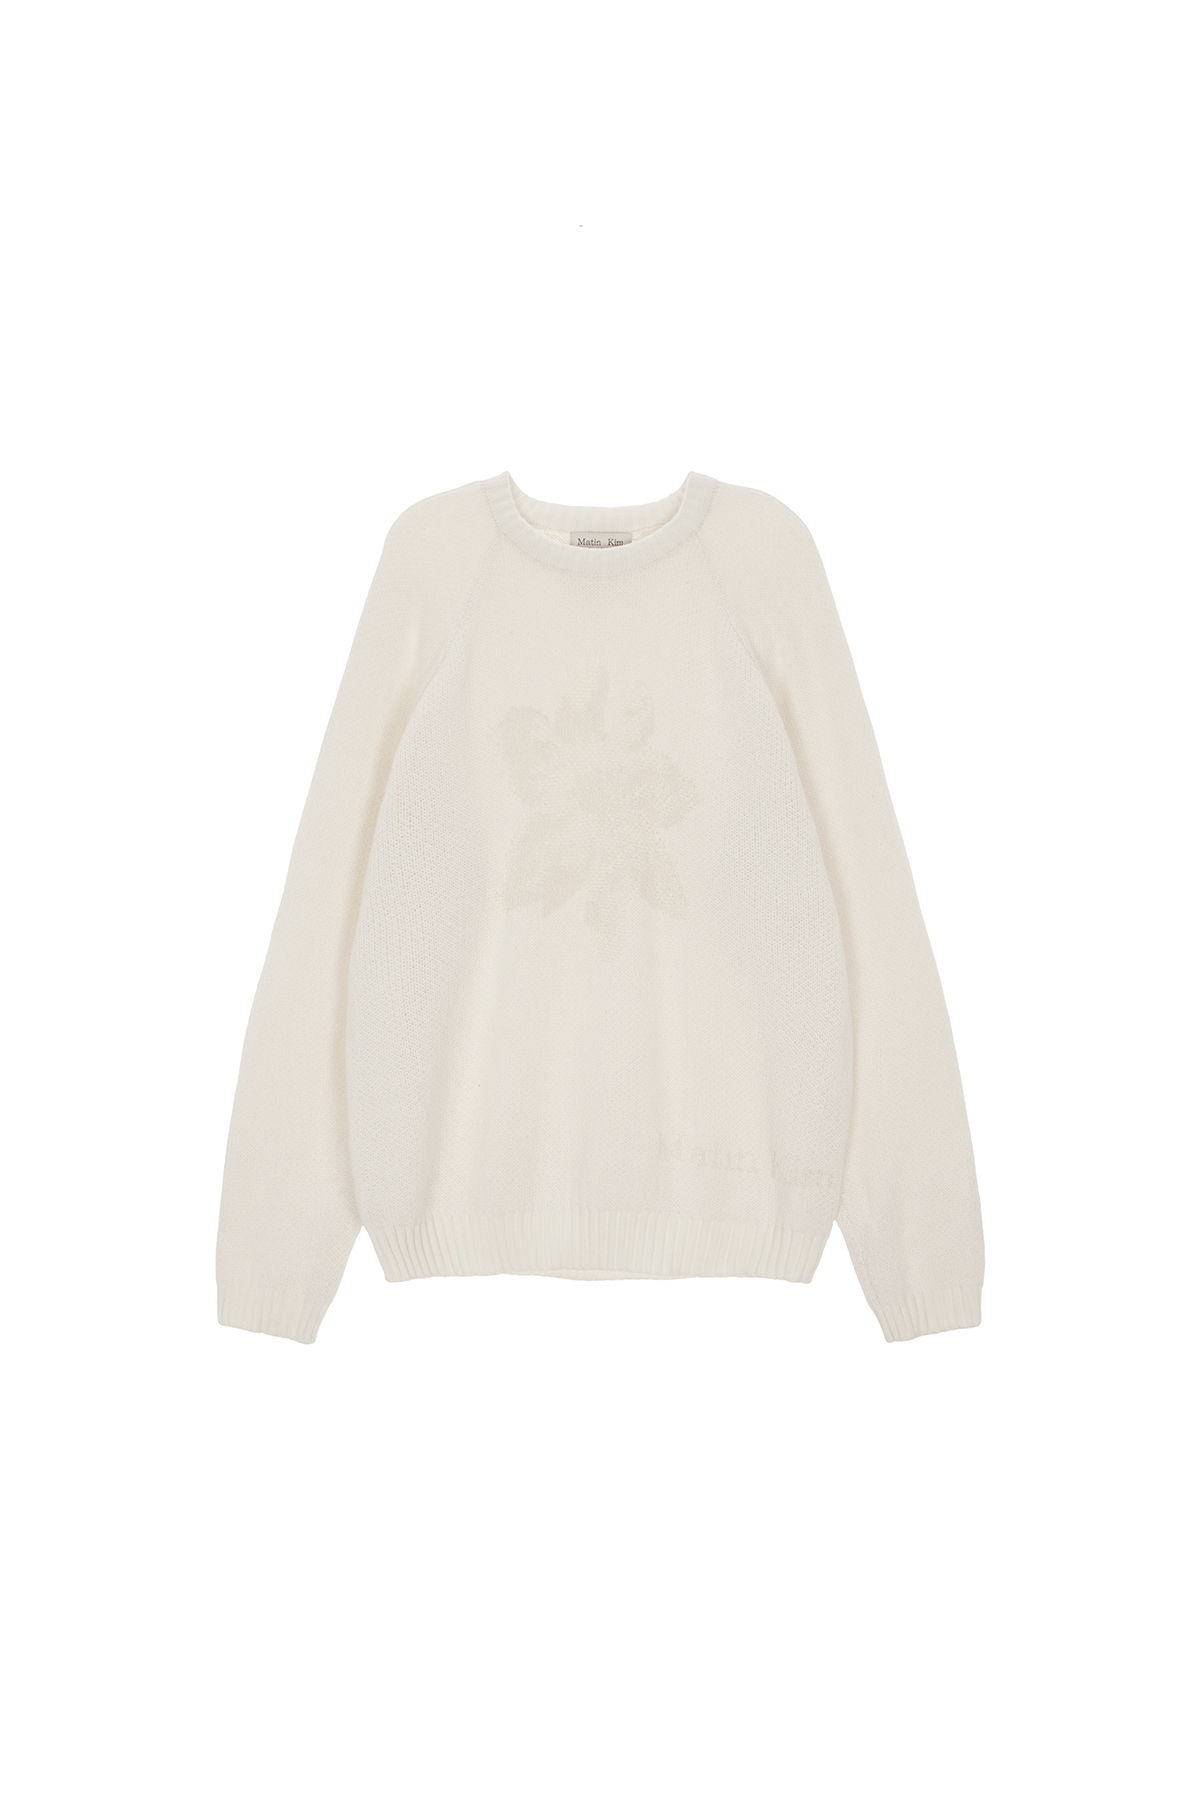 FLOWER JACQUARD KNIT PULLOVER IN IVORY